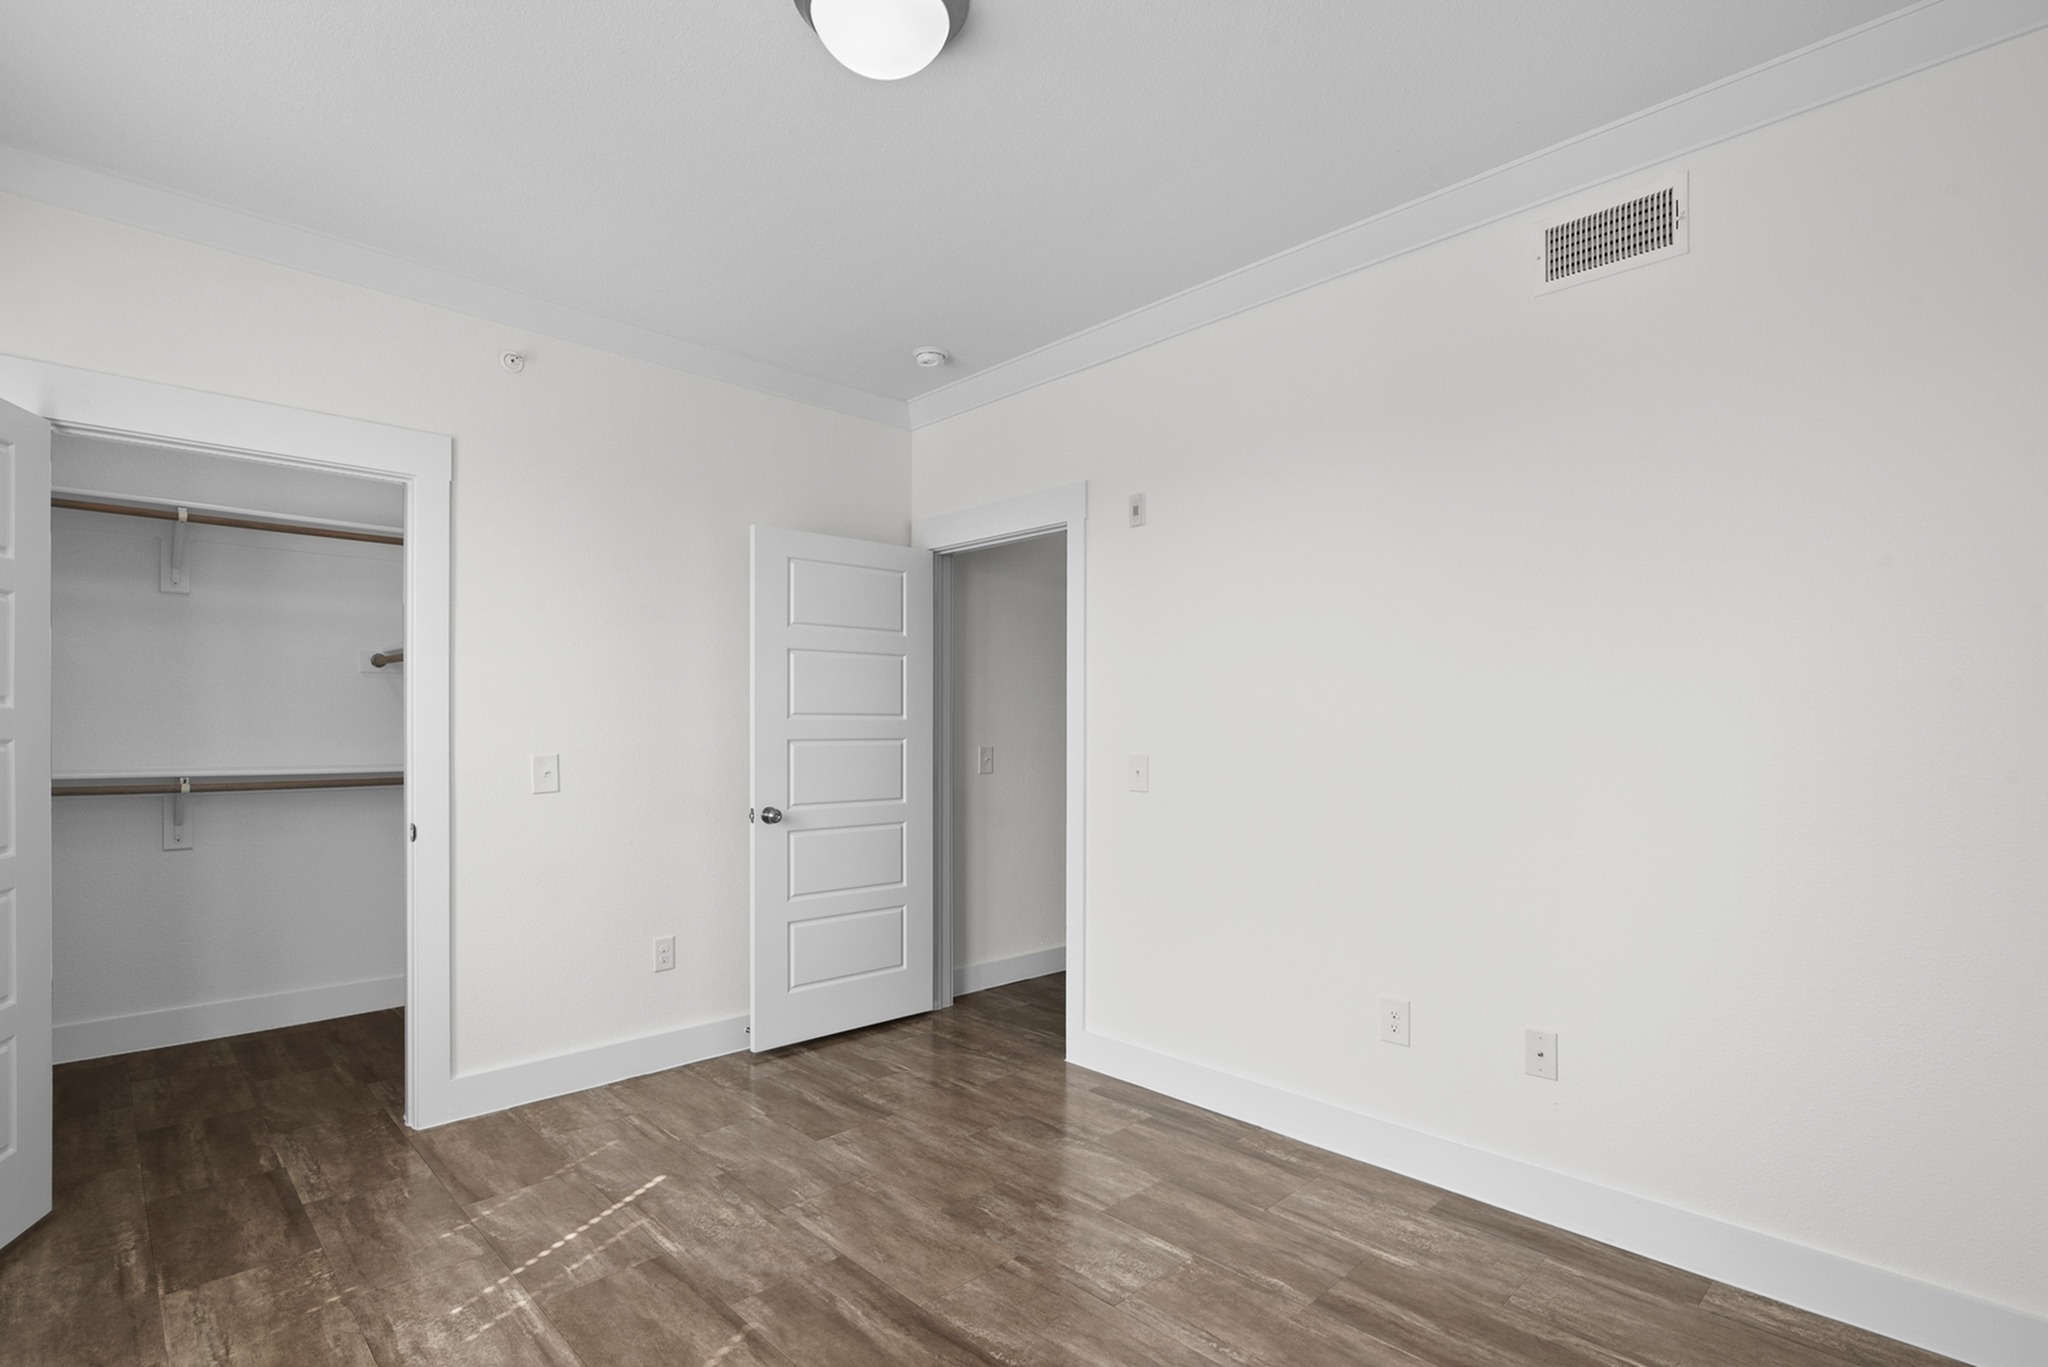 Floor Plan 6 Closet Space | Conroe Apartments | The Towers Woodland